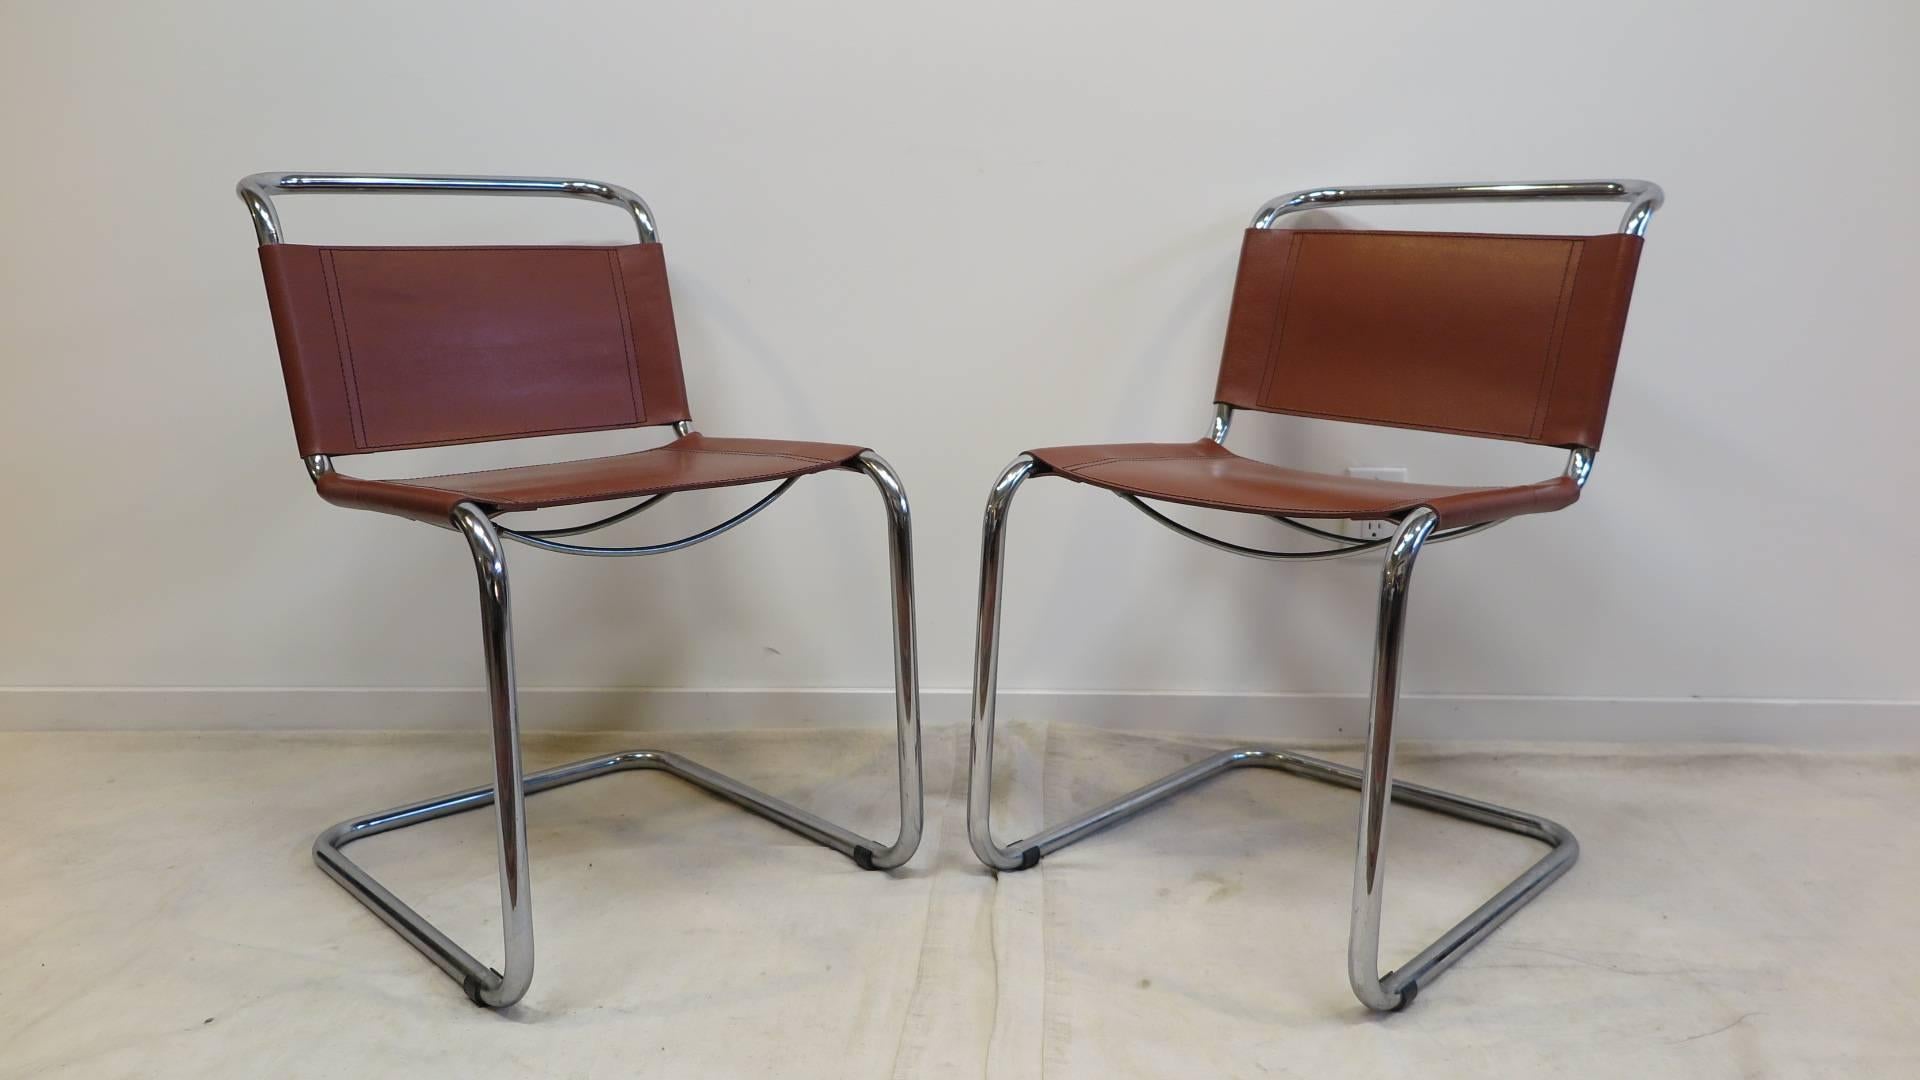 A pair chairs designed by Mart Stam for Fasem.
These chairs have a cantilevered tubular metal frame with cognac saddle leather seating and backrest. They are in very good condition. 
 